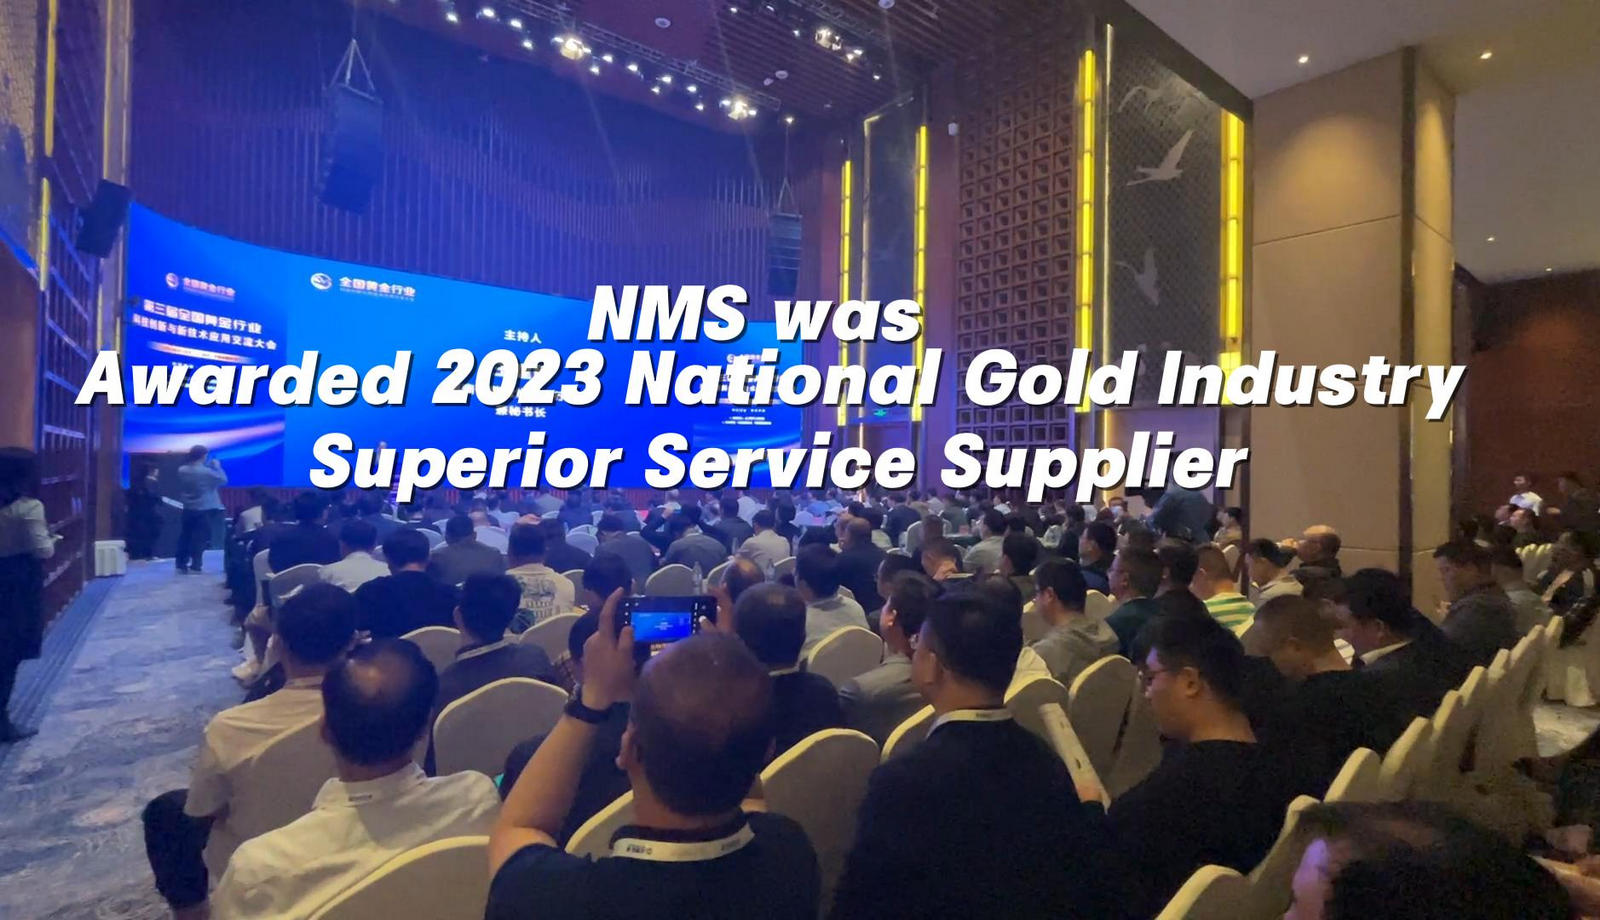 NMS was Awarded 2023 National Gold Industry Superior Service Supplier